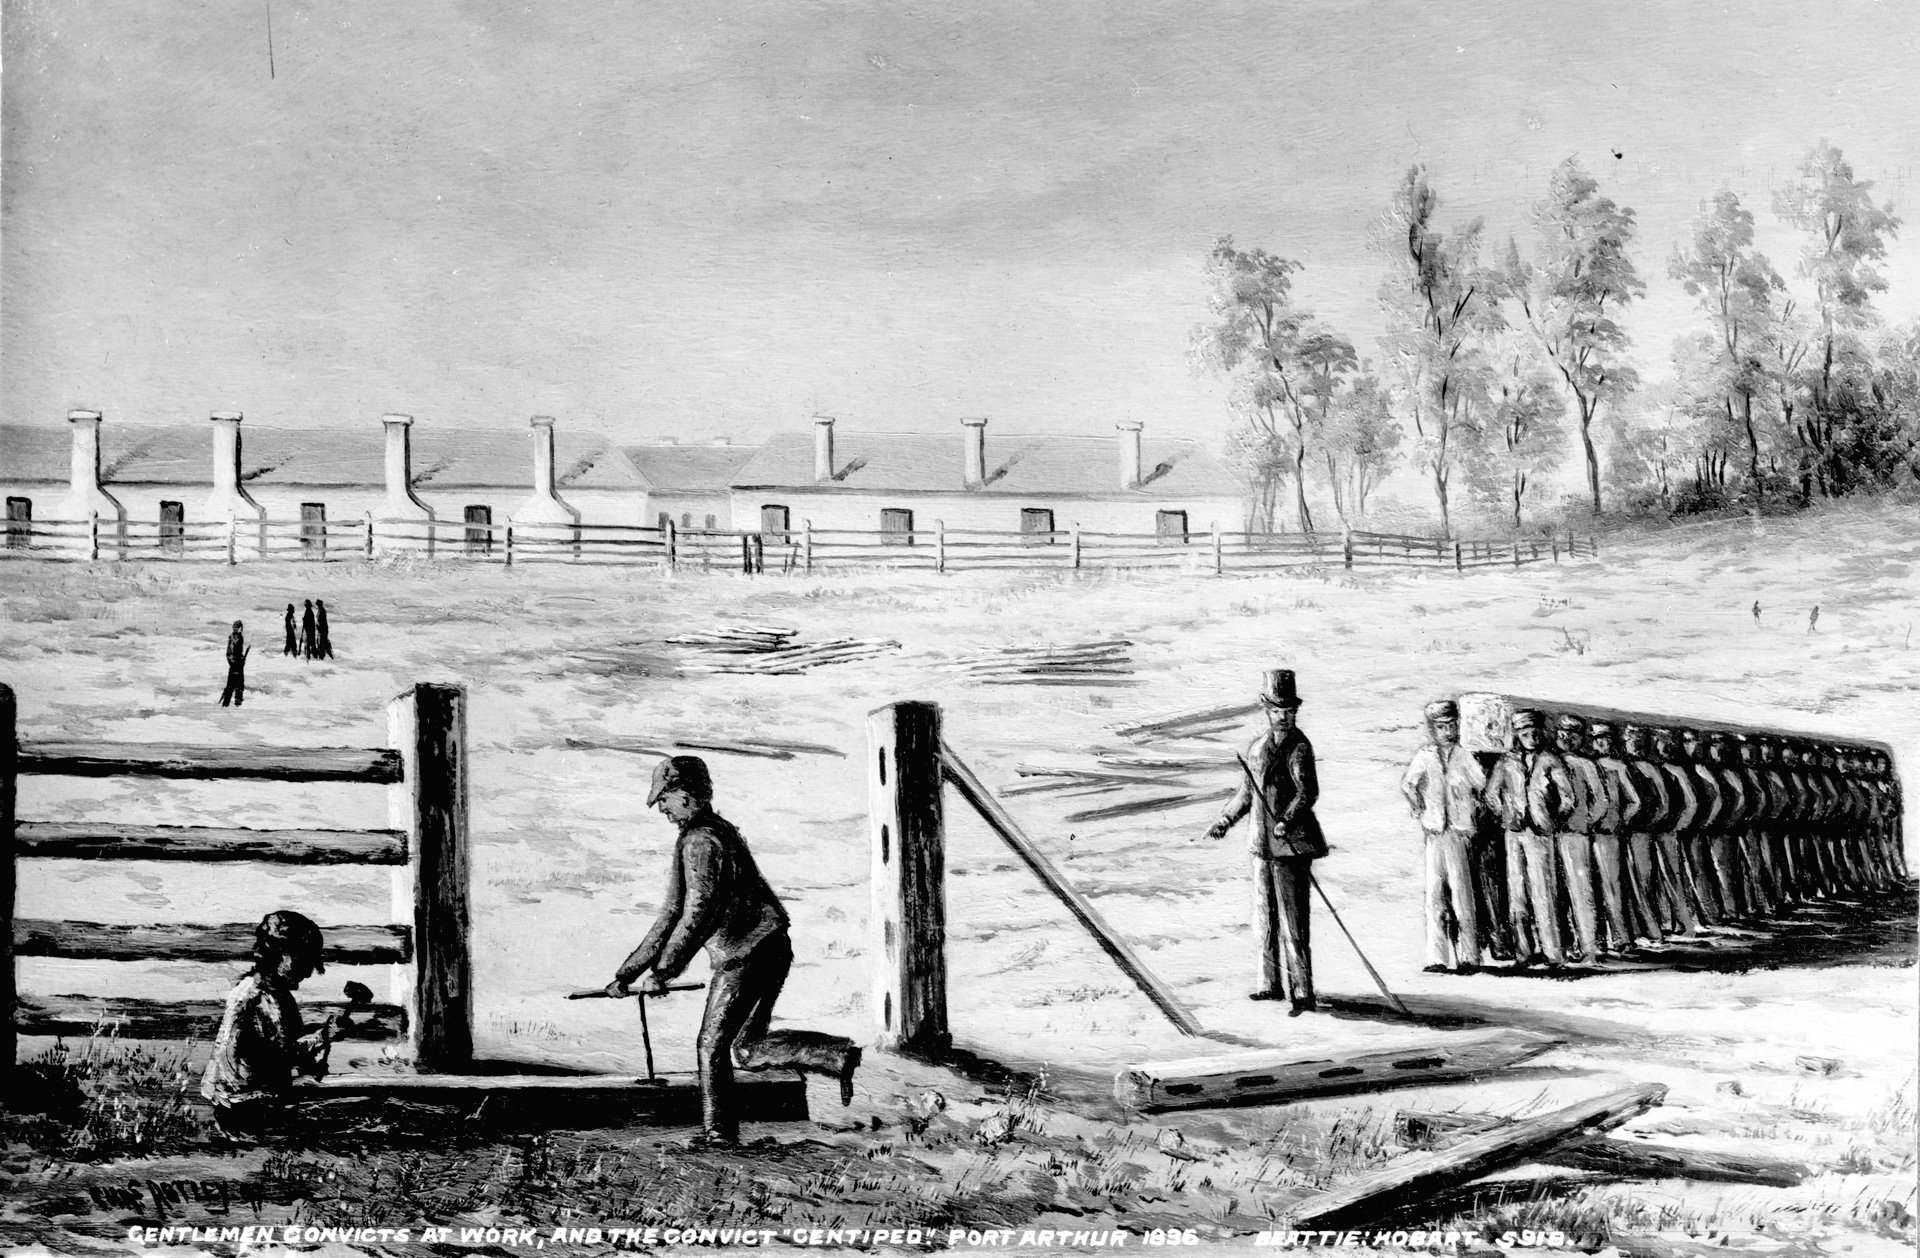 Convicts in Port Arthur carrying a long log on their shoulders during fence construction.